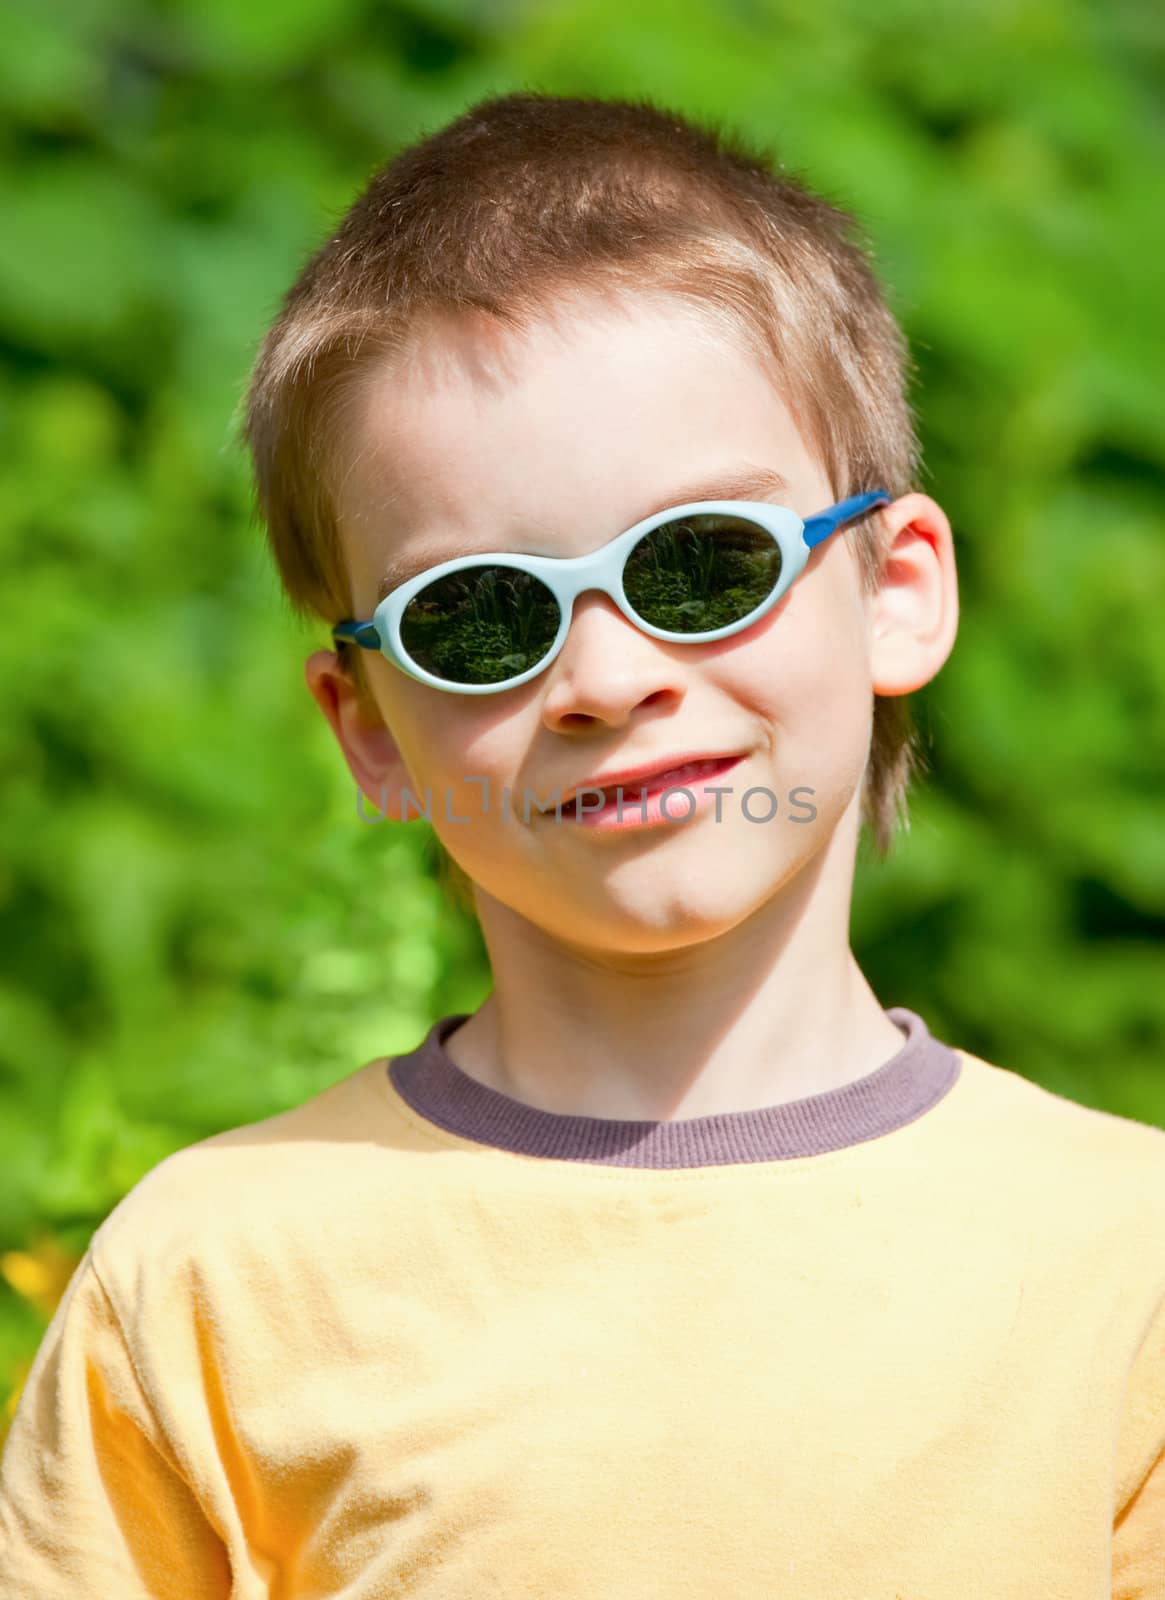 Portrait of a young boy with sunglasses and yellow shirt outdoors